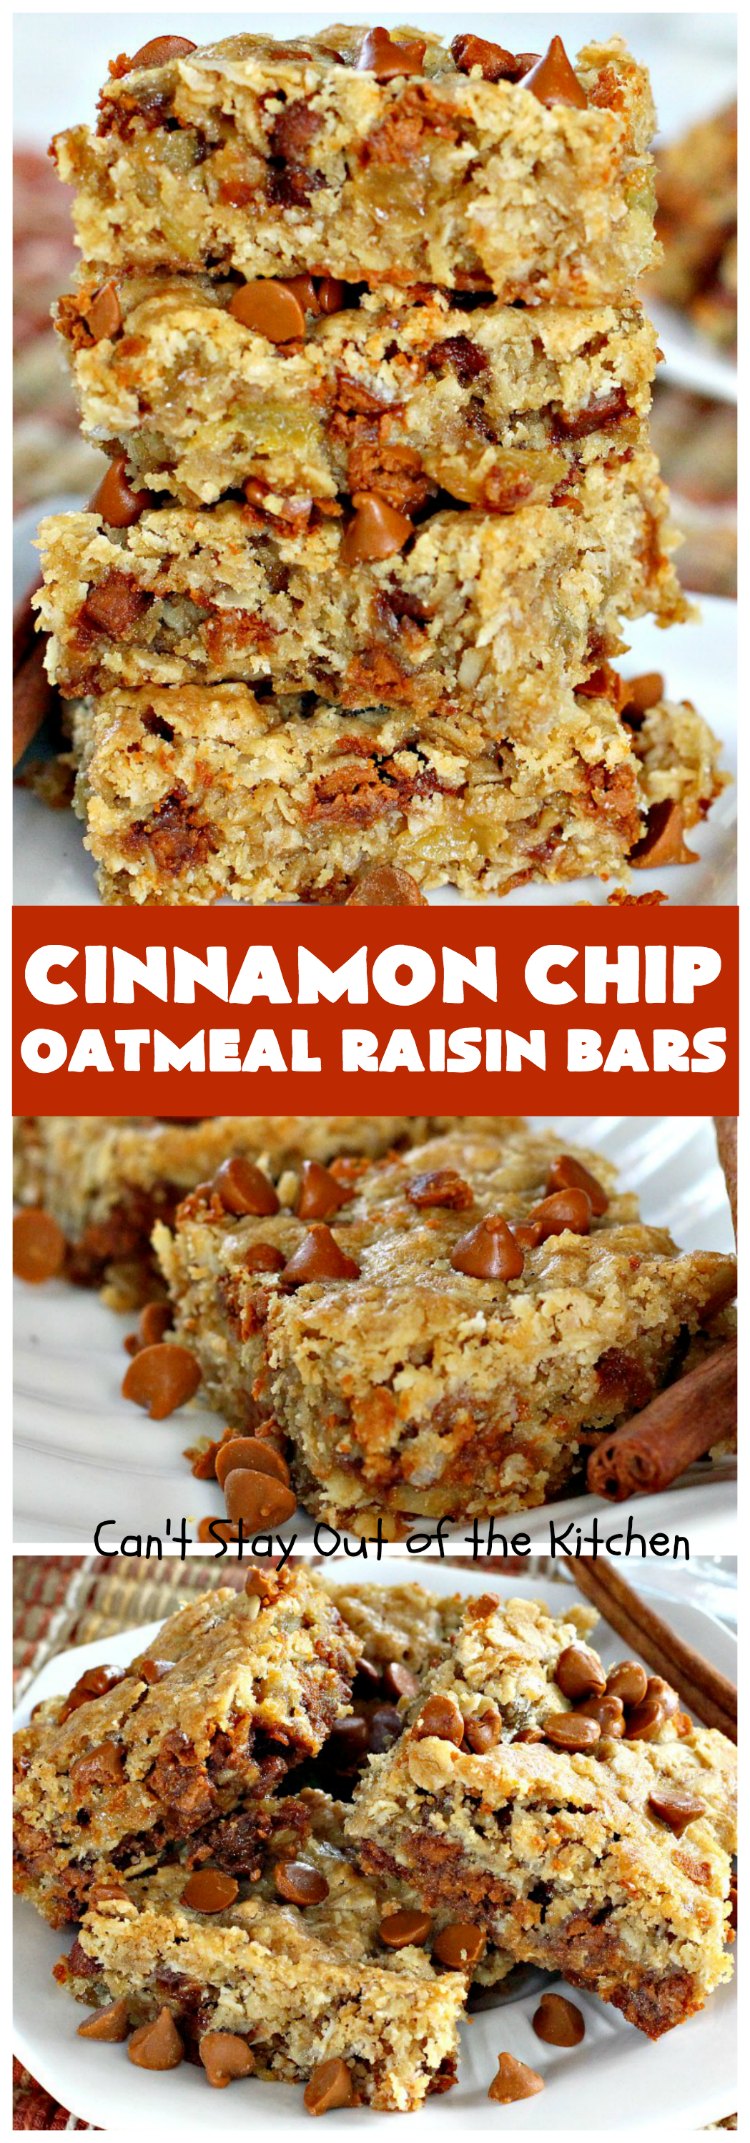 Cinnamon Chip Oatmeal Raisin Bars | Can't Stay Out of the Kitchen